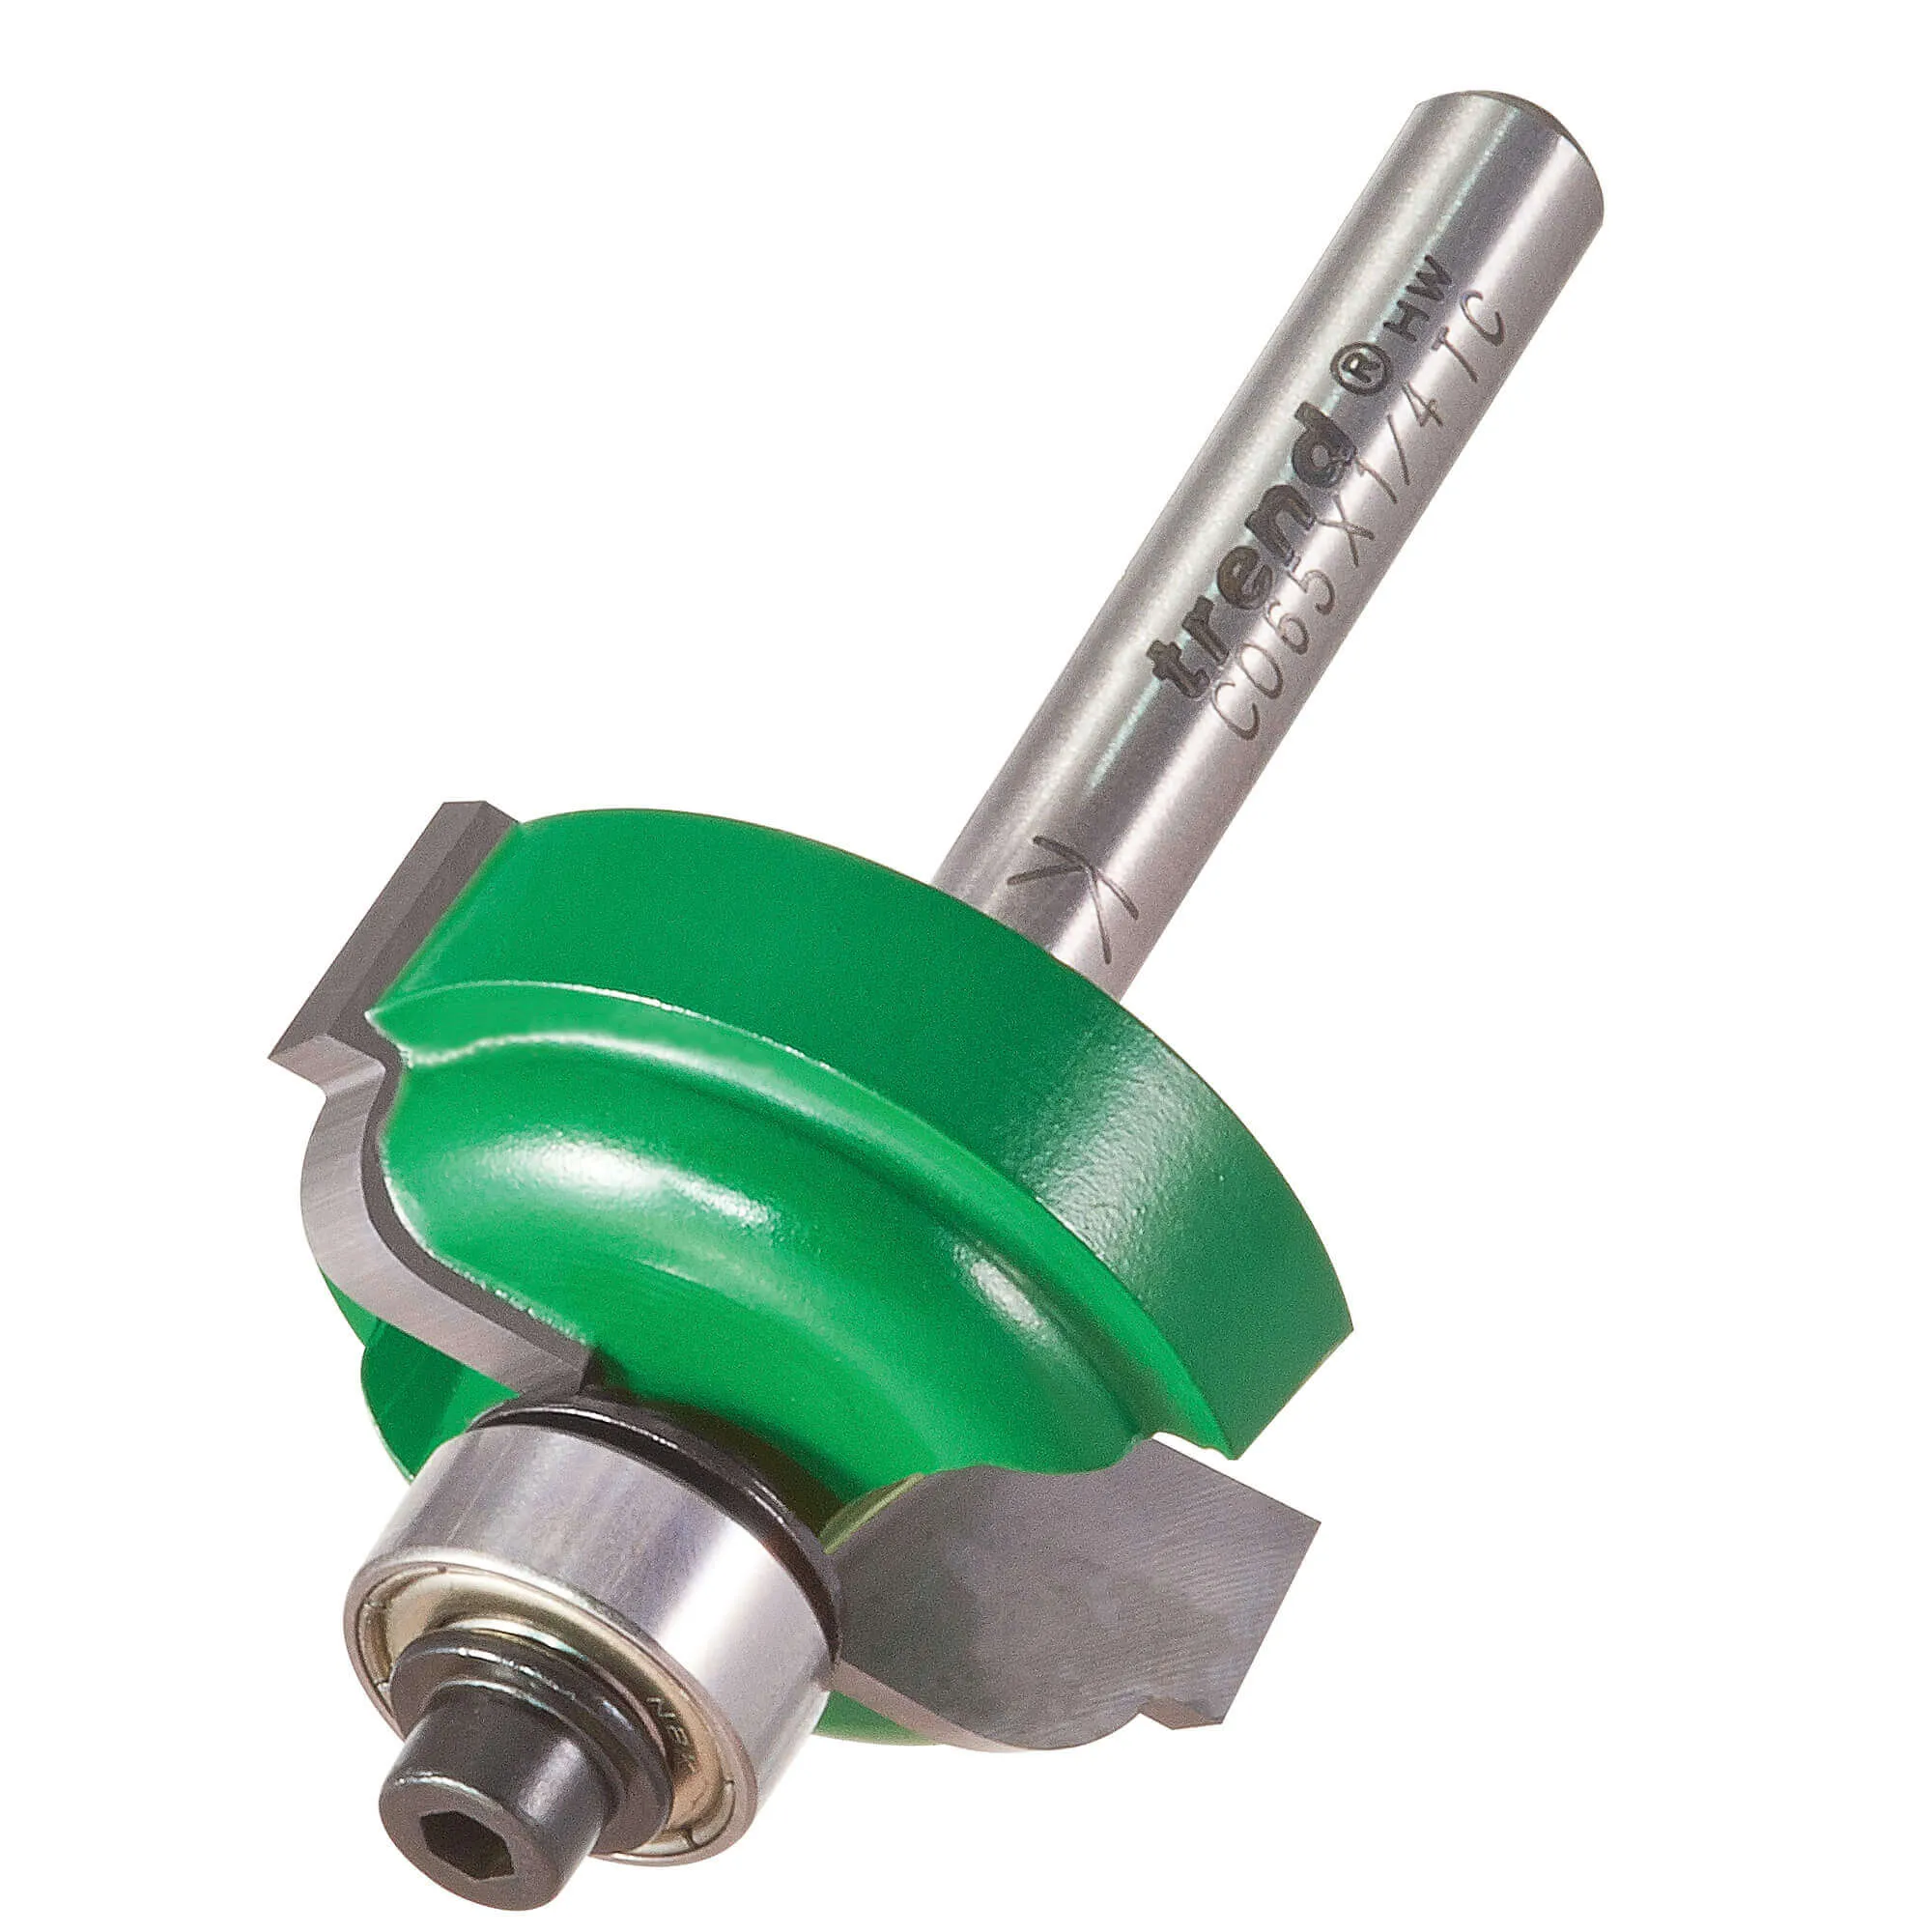 Trend CRAFTPRO Radius Bearing Guided Router Cutter - 31mm, 12.7mm, 1/4"